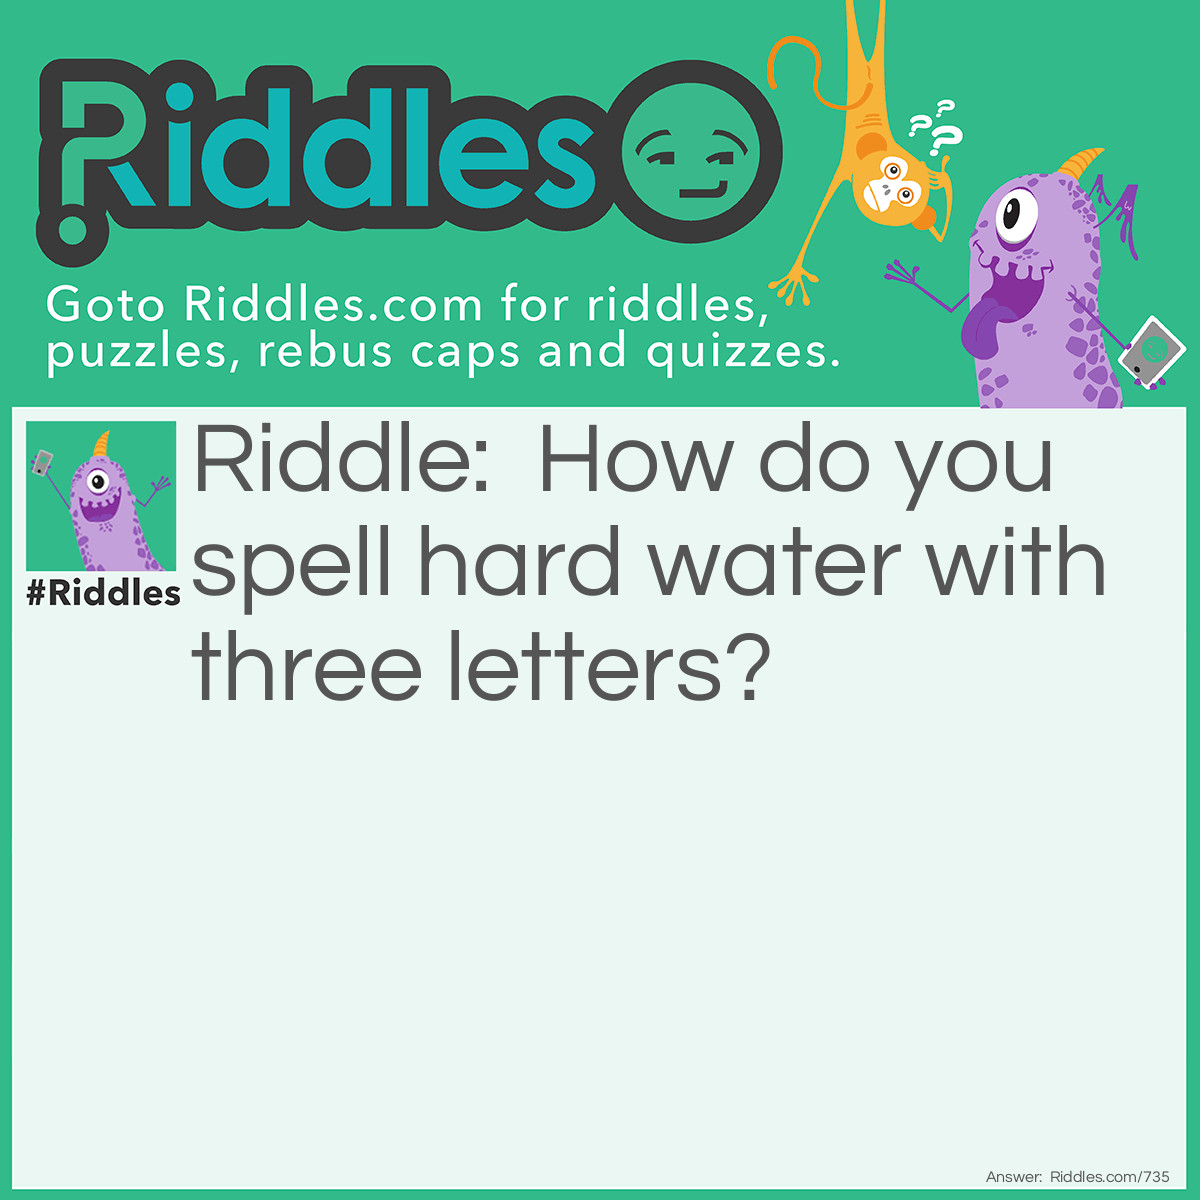 Riddle: How do you spell hard water with three letters? Answer: ICE.